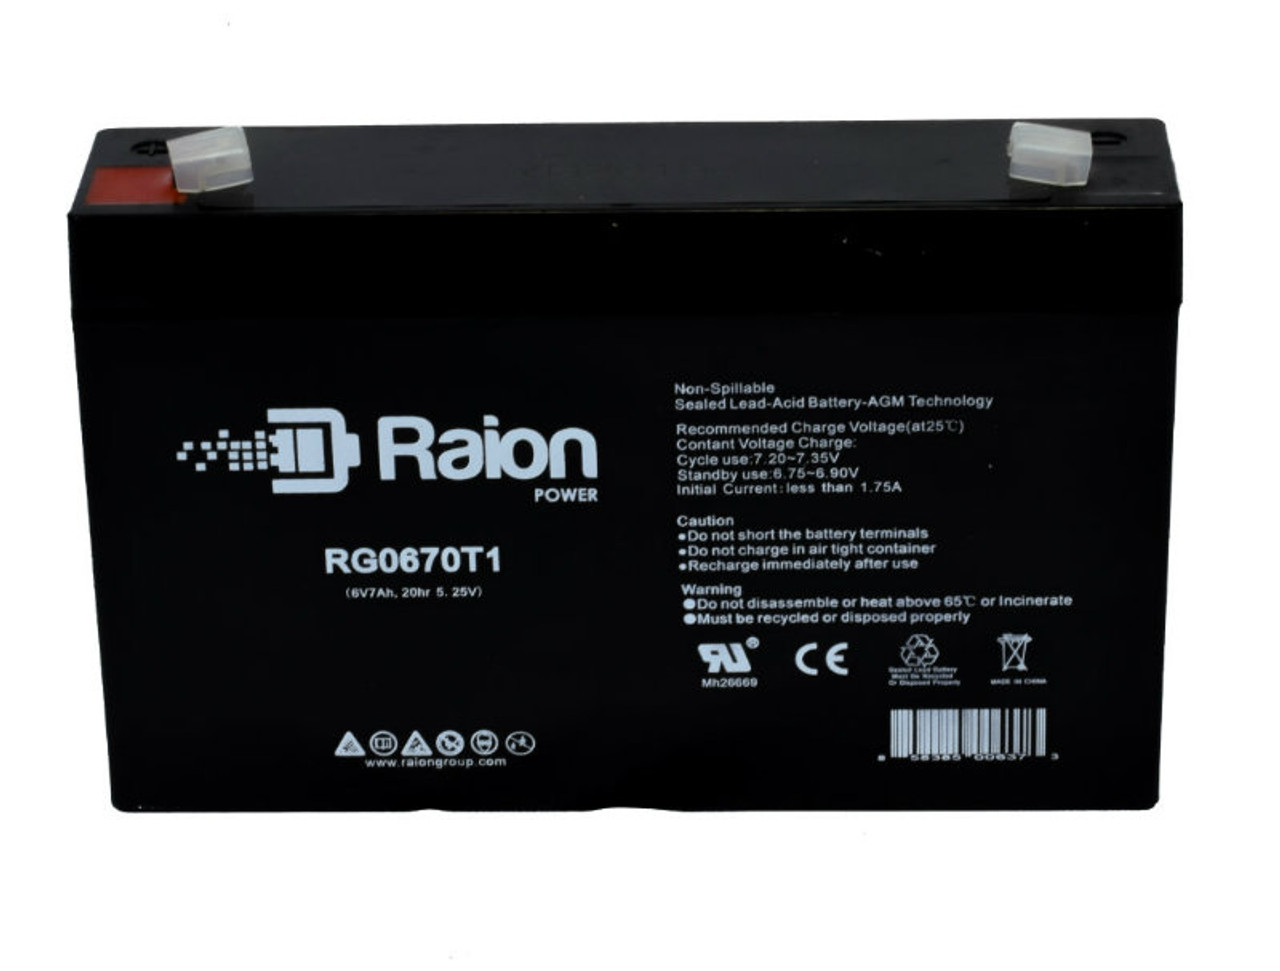 Raion Power RG0670T1 Replacement Battery Cartridge for Sure-Lites 3902